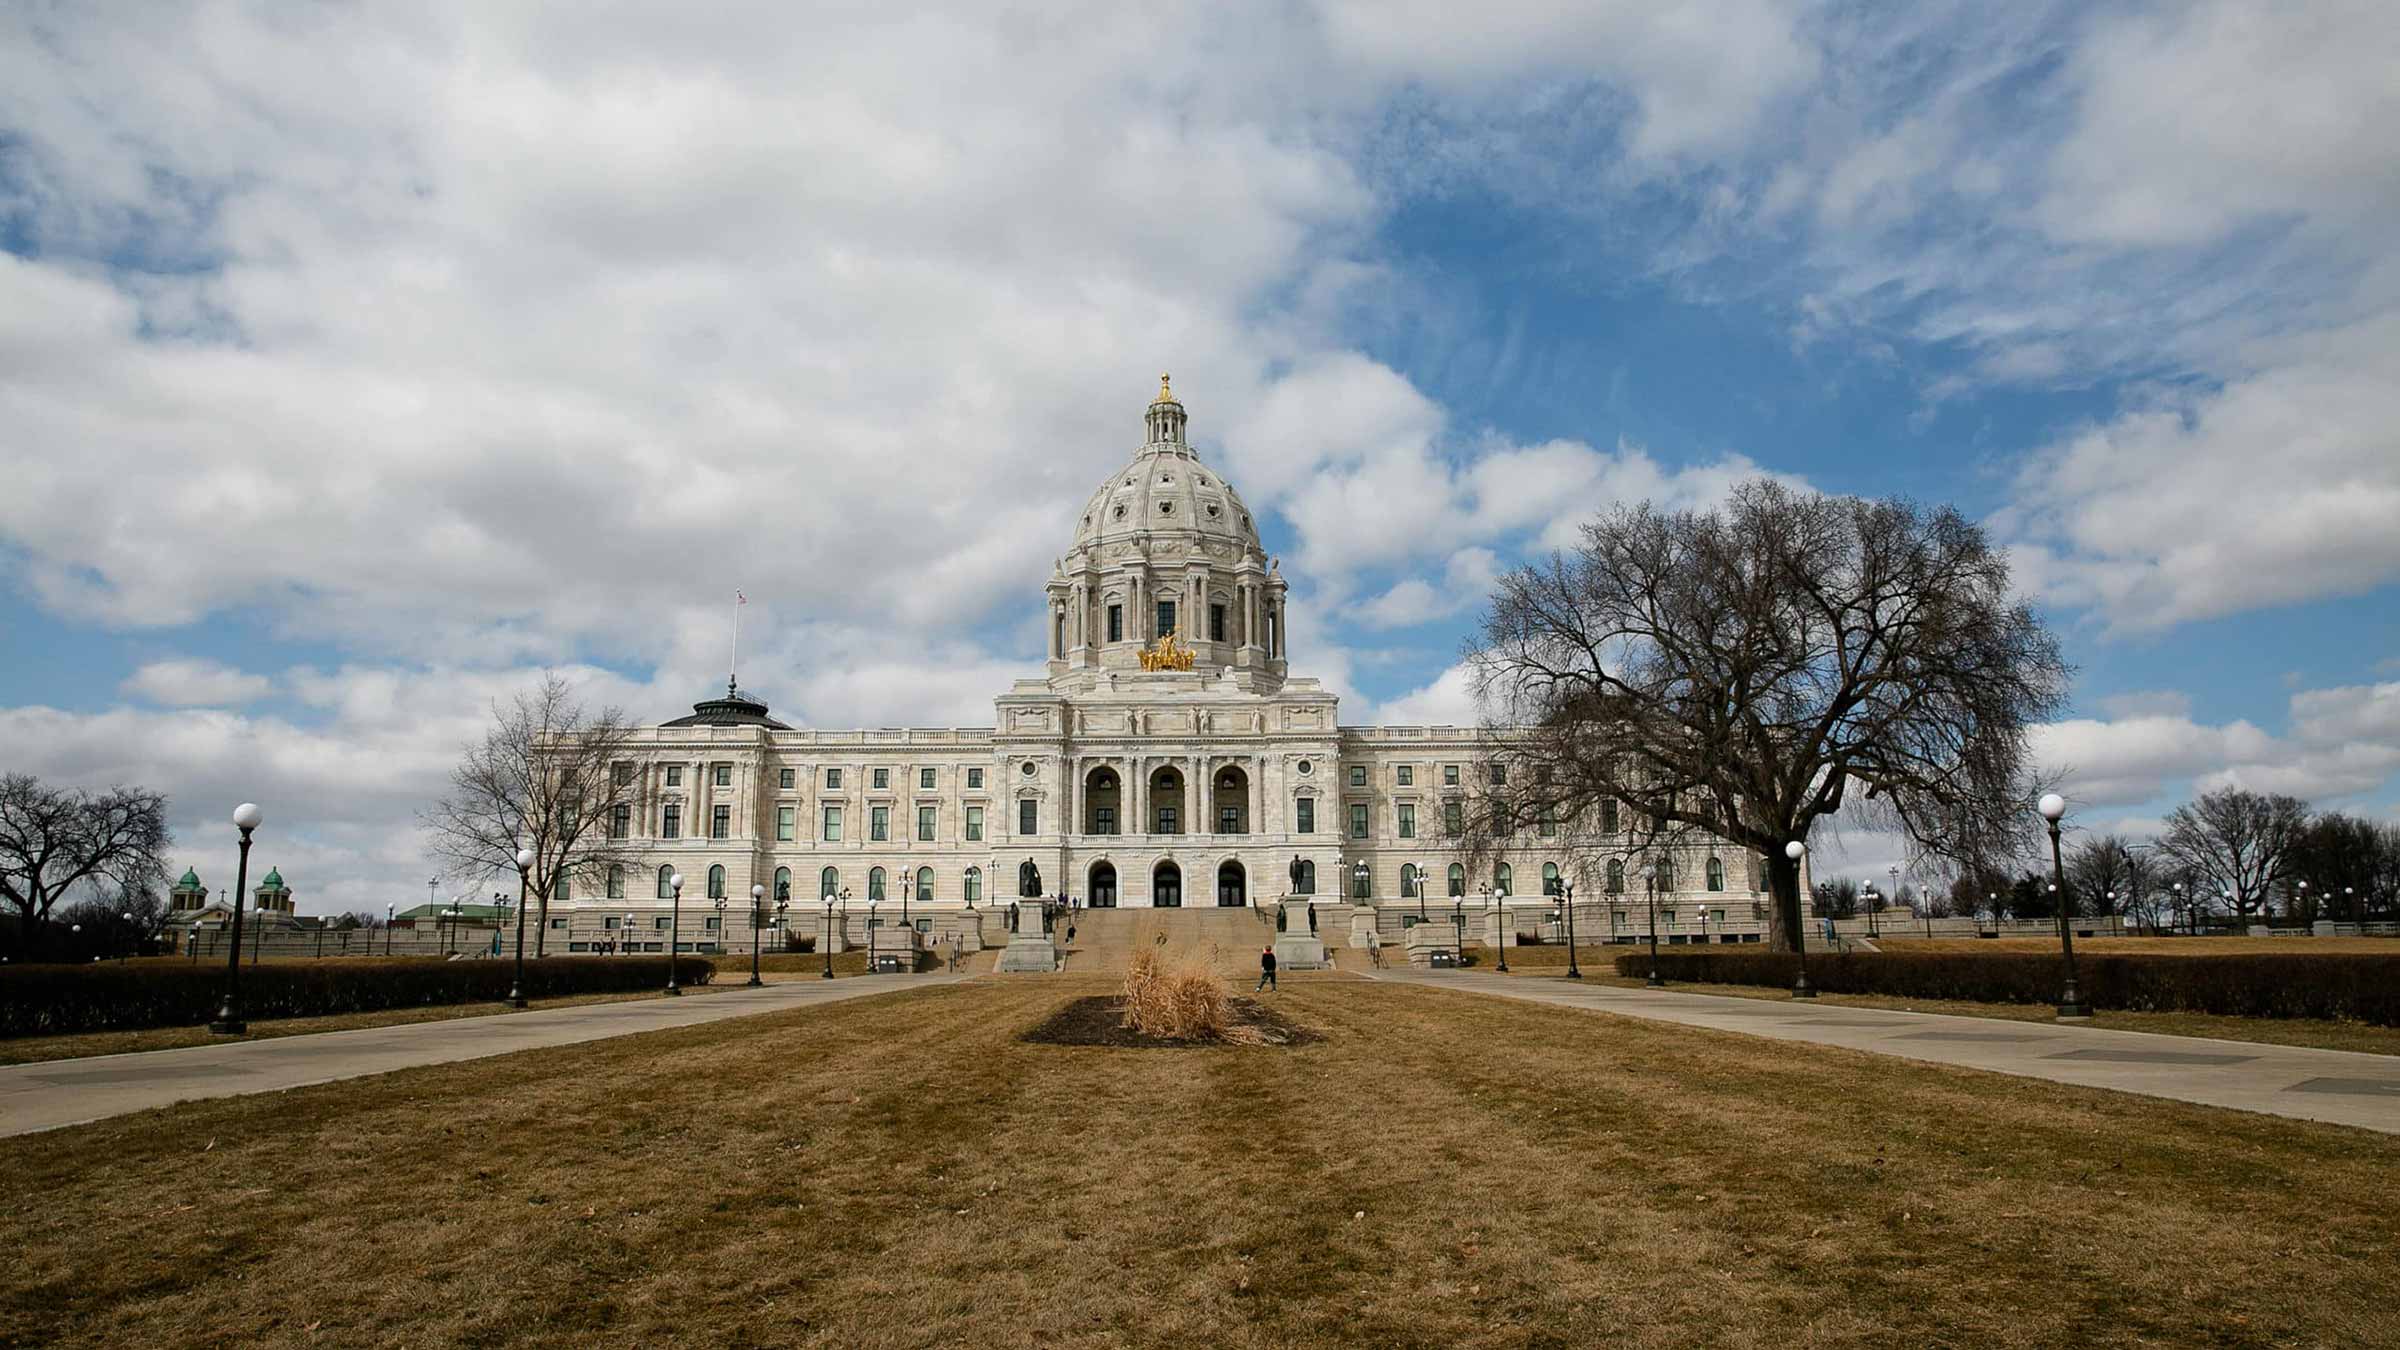 The Minnesota state capital building on a partly cloudy day